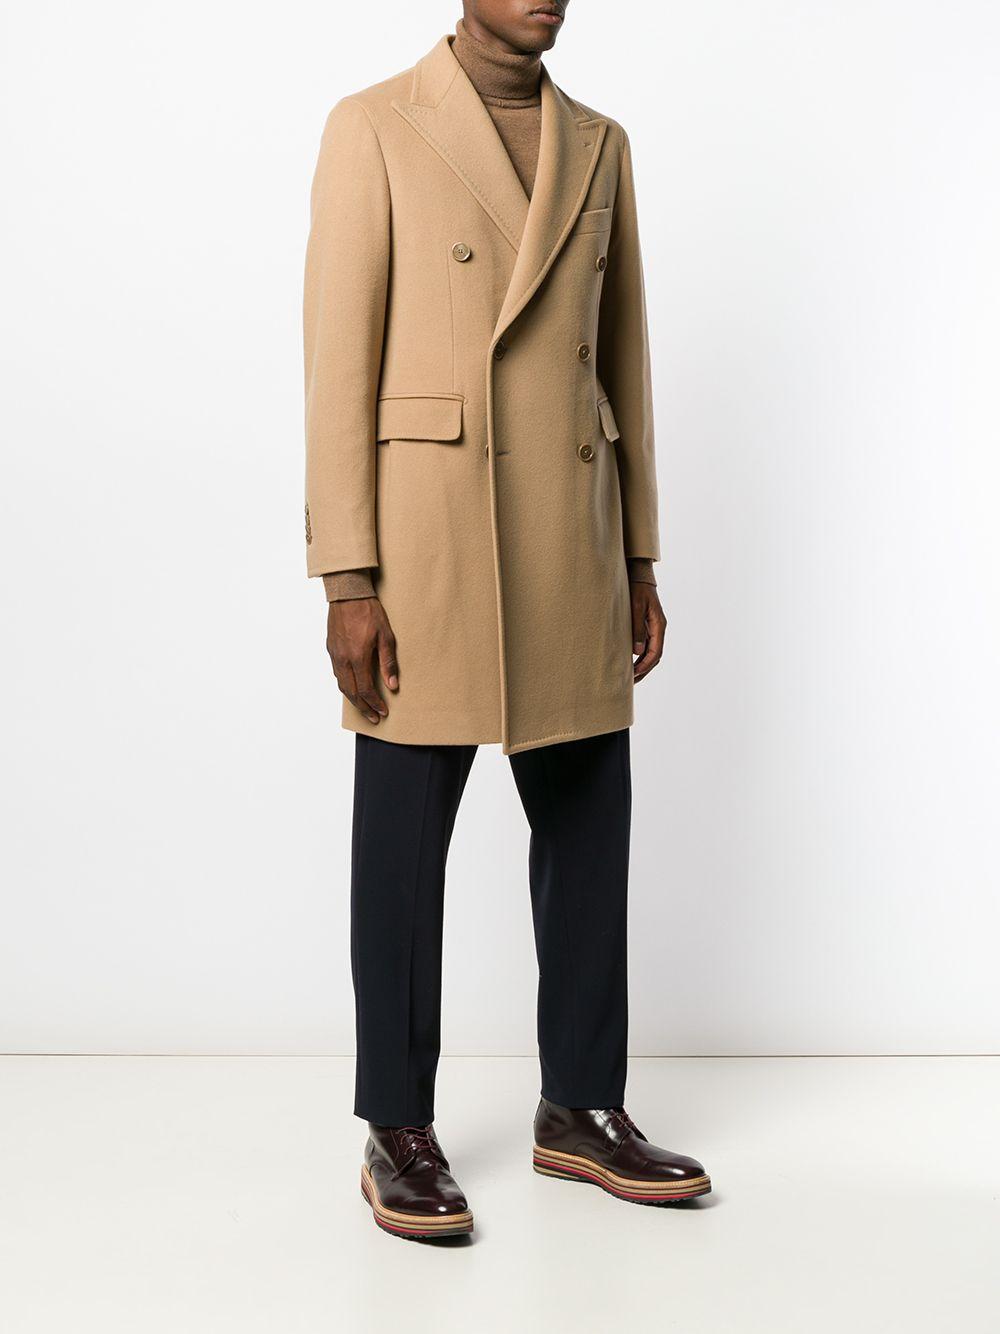 Tagliatore Wool Double-breasted Coat in Natural for Men - Lyst